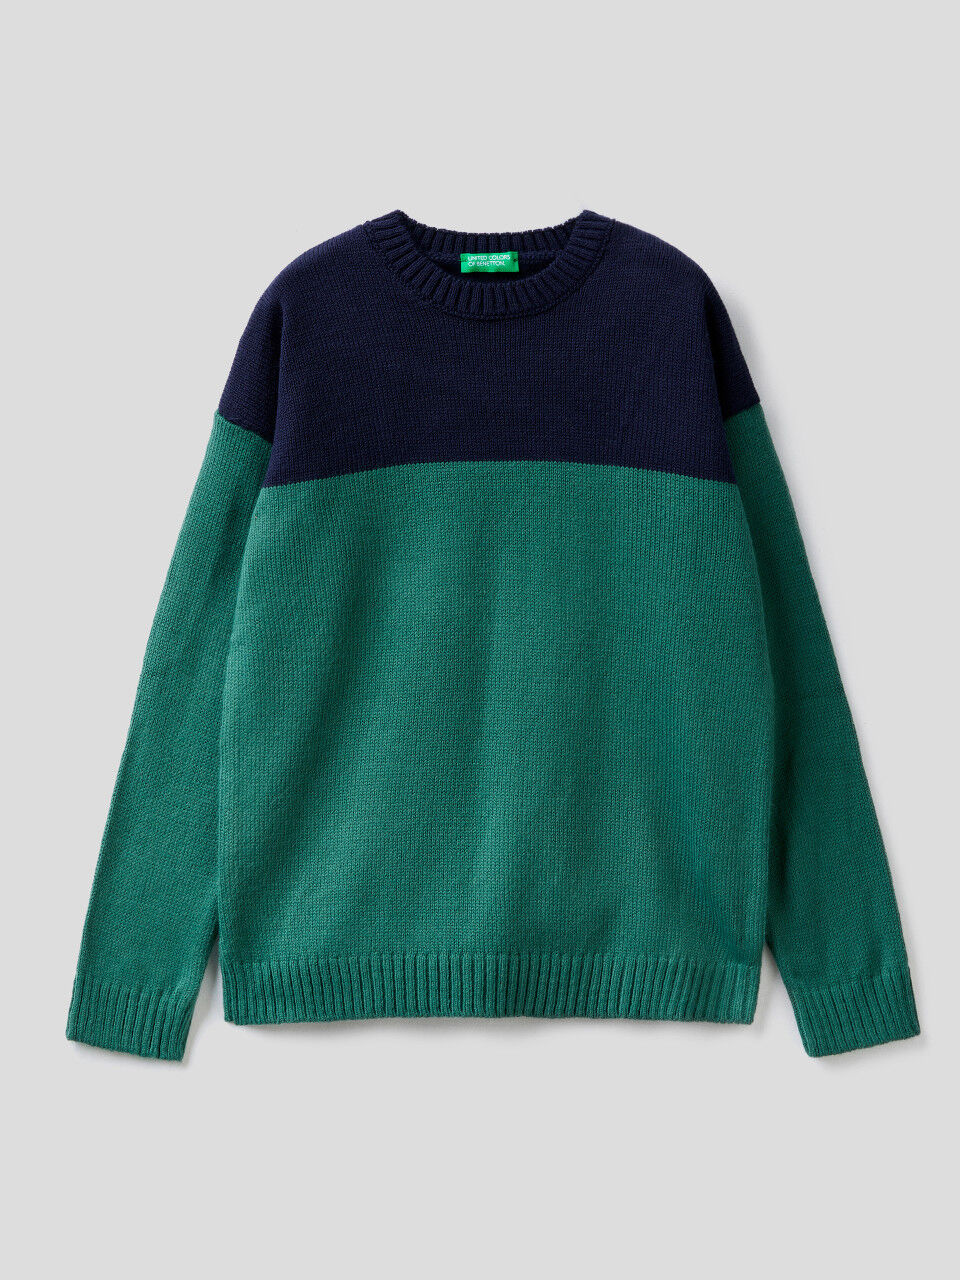 Benetton United Colors of Benetton Boys Grey Crew Neck  Wood Pullover Jumper Size 7-8 Yea 